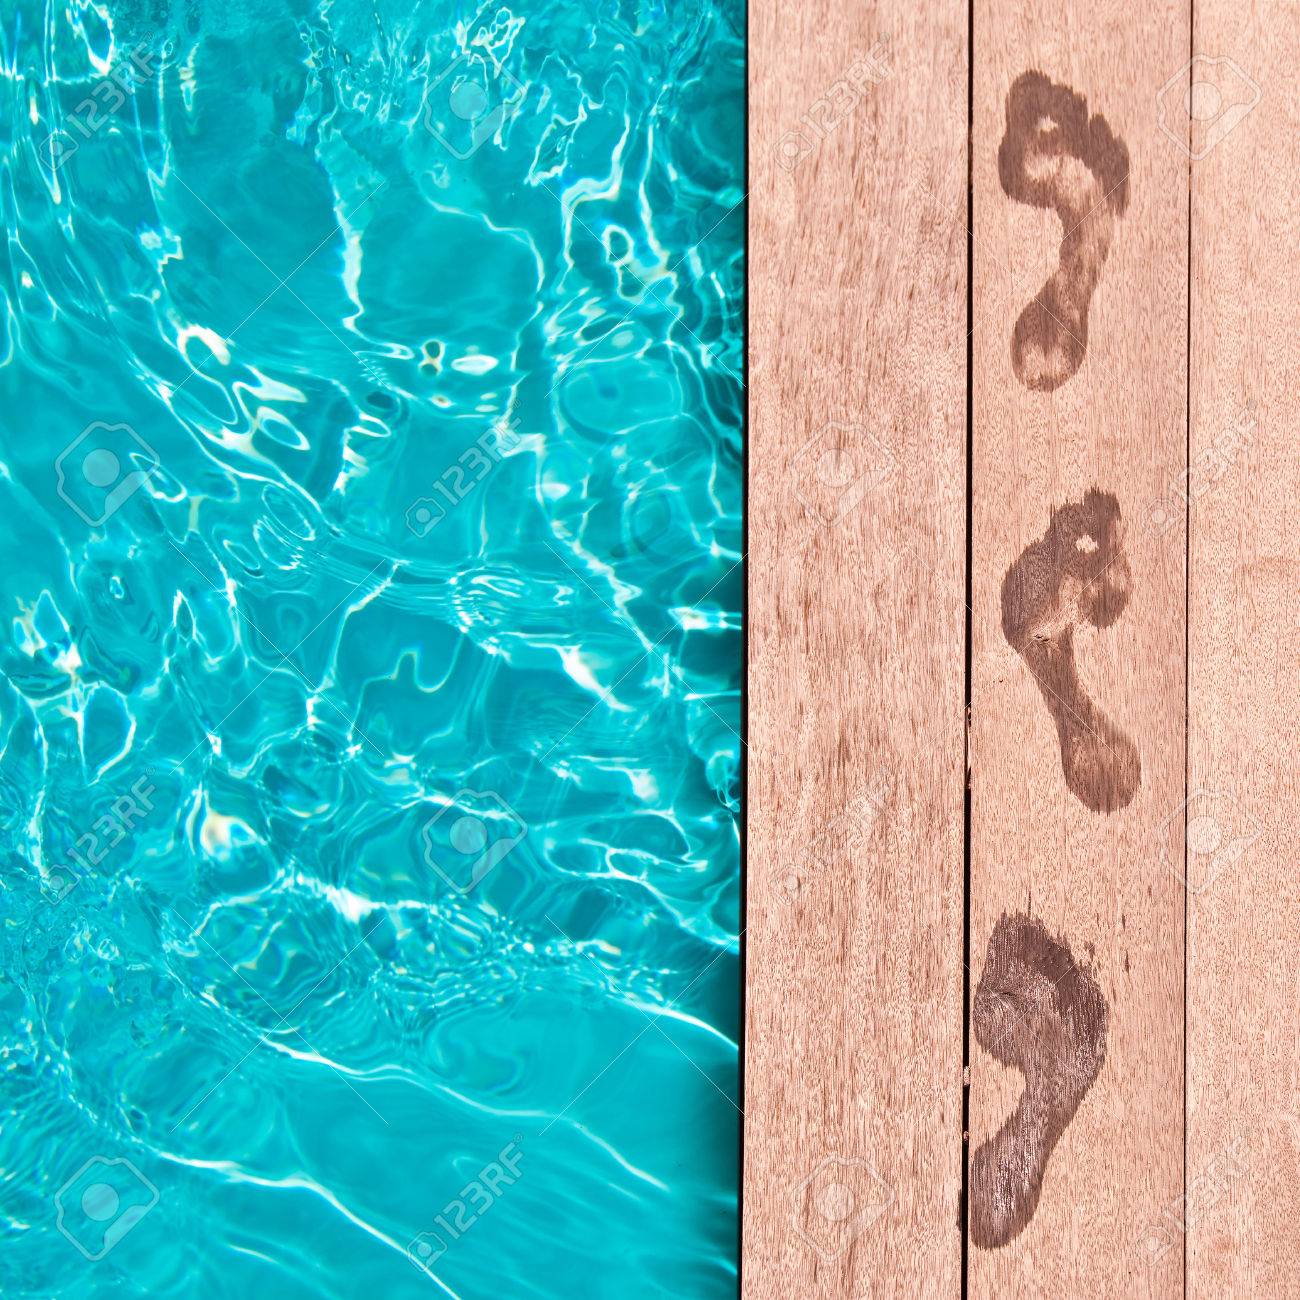 Introduce Annotation: Track footprints near the pool